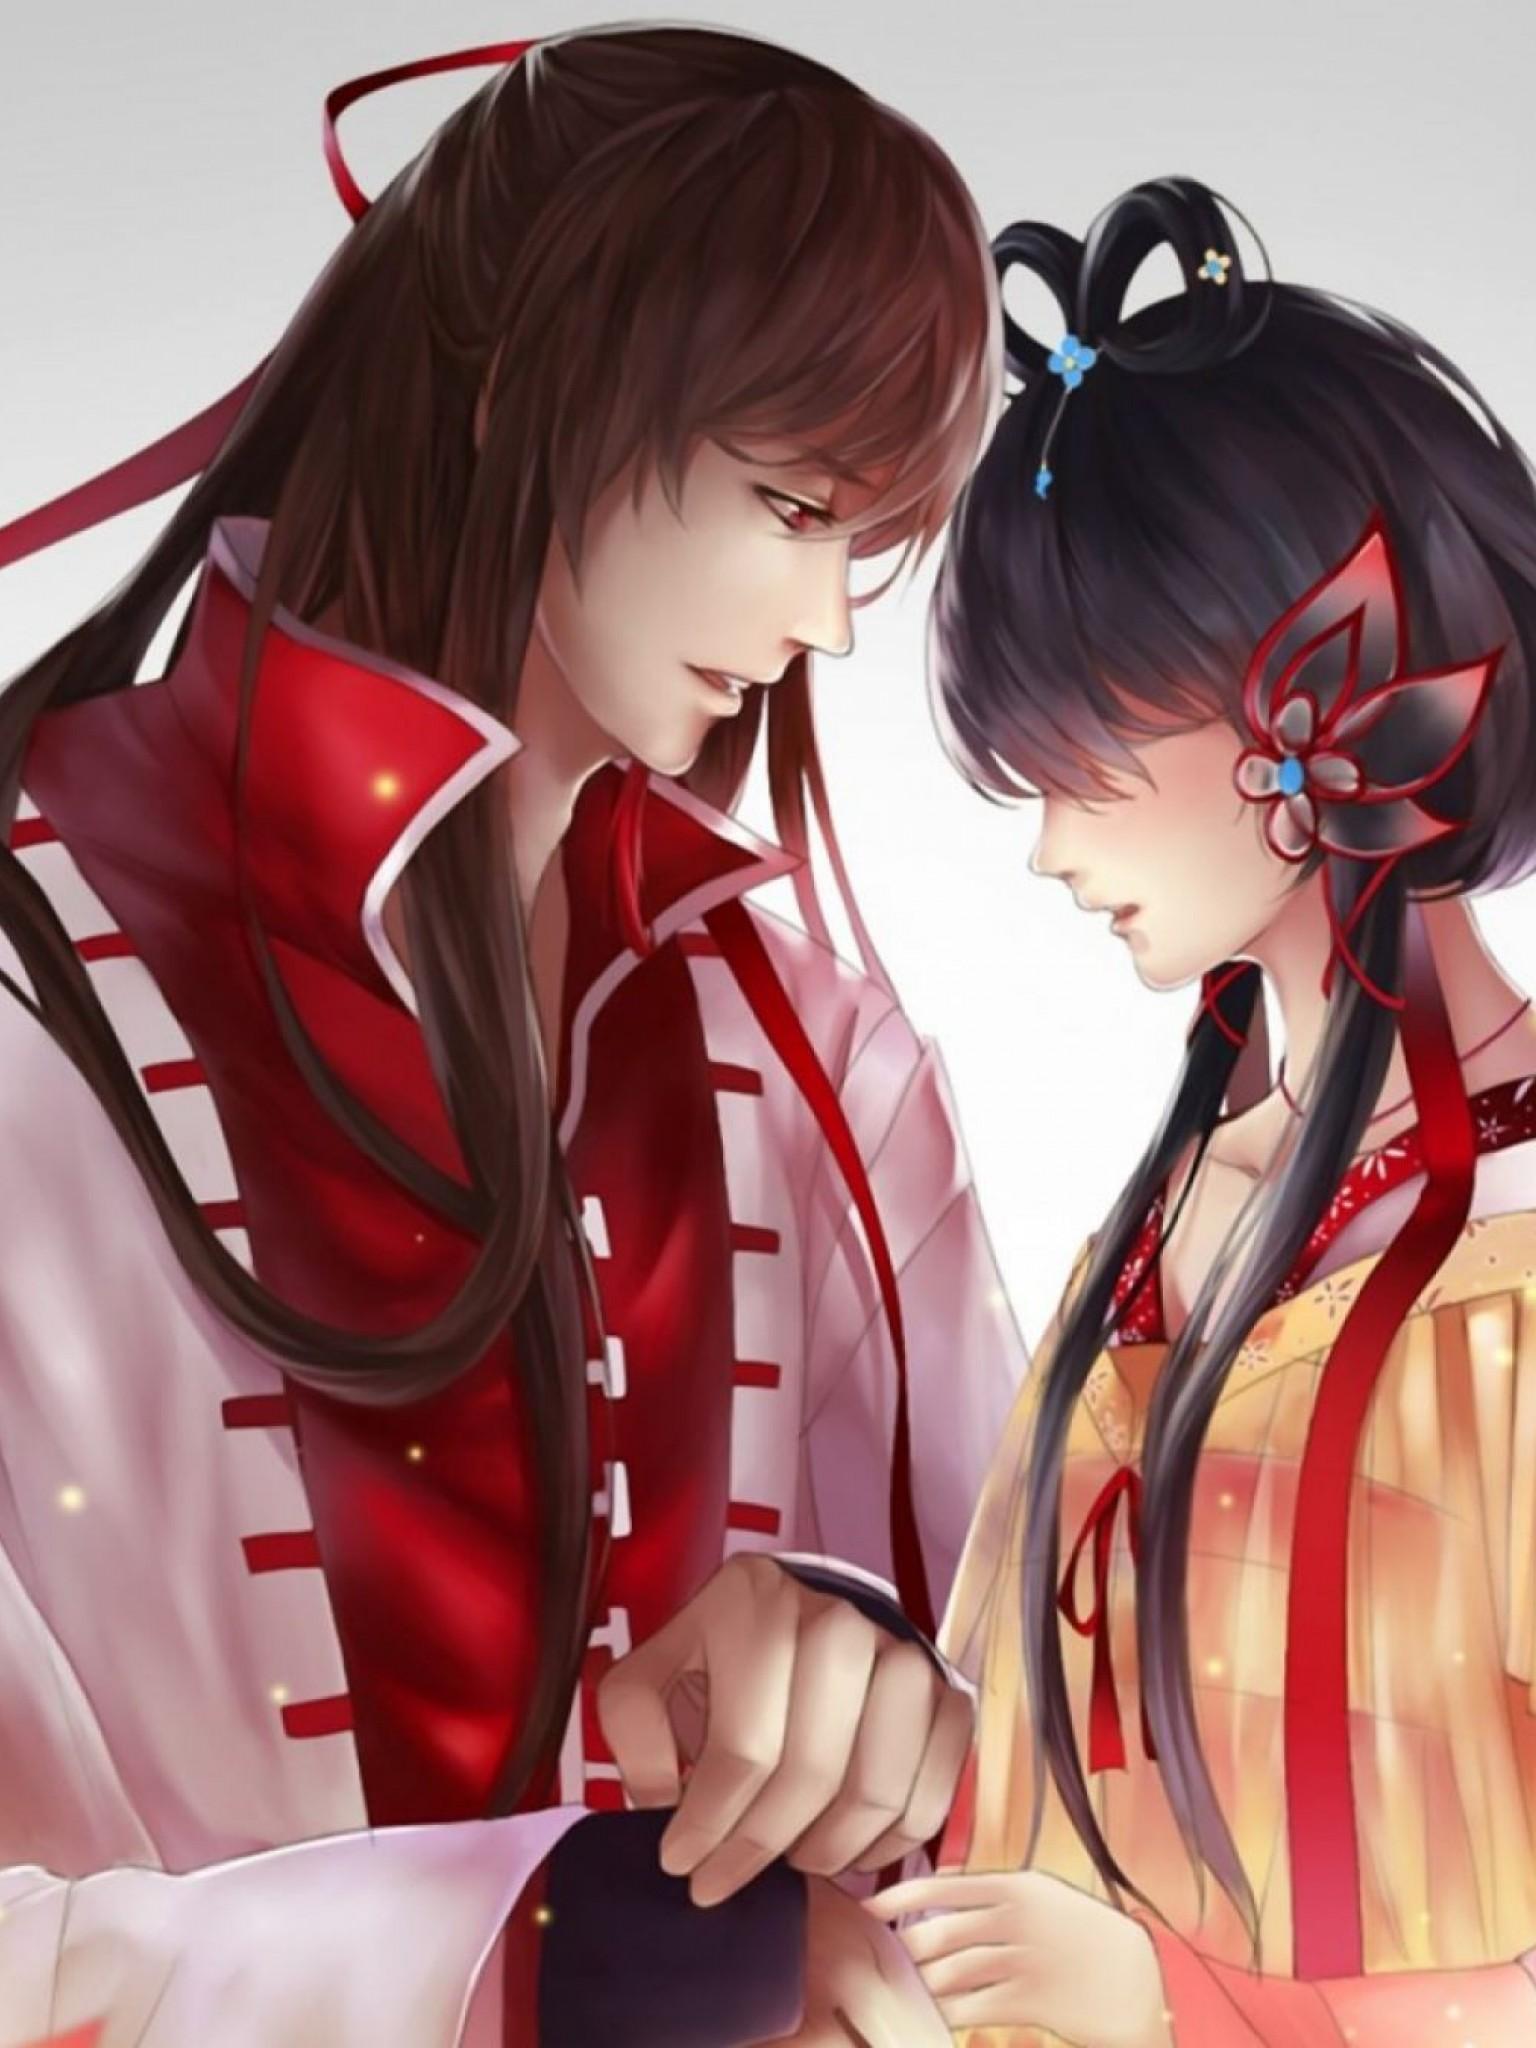 Cute Anime Couple Beautiful HD Wallpaper for Desktop and Mobiles